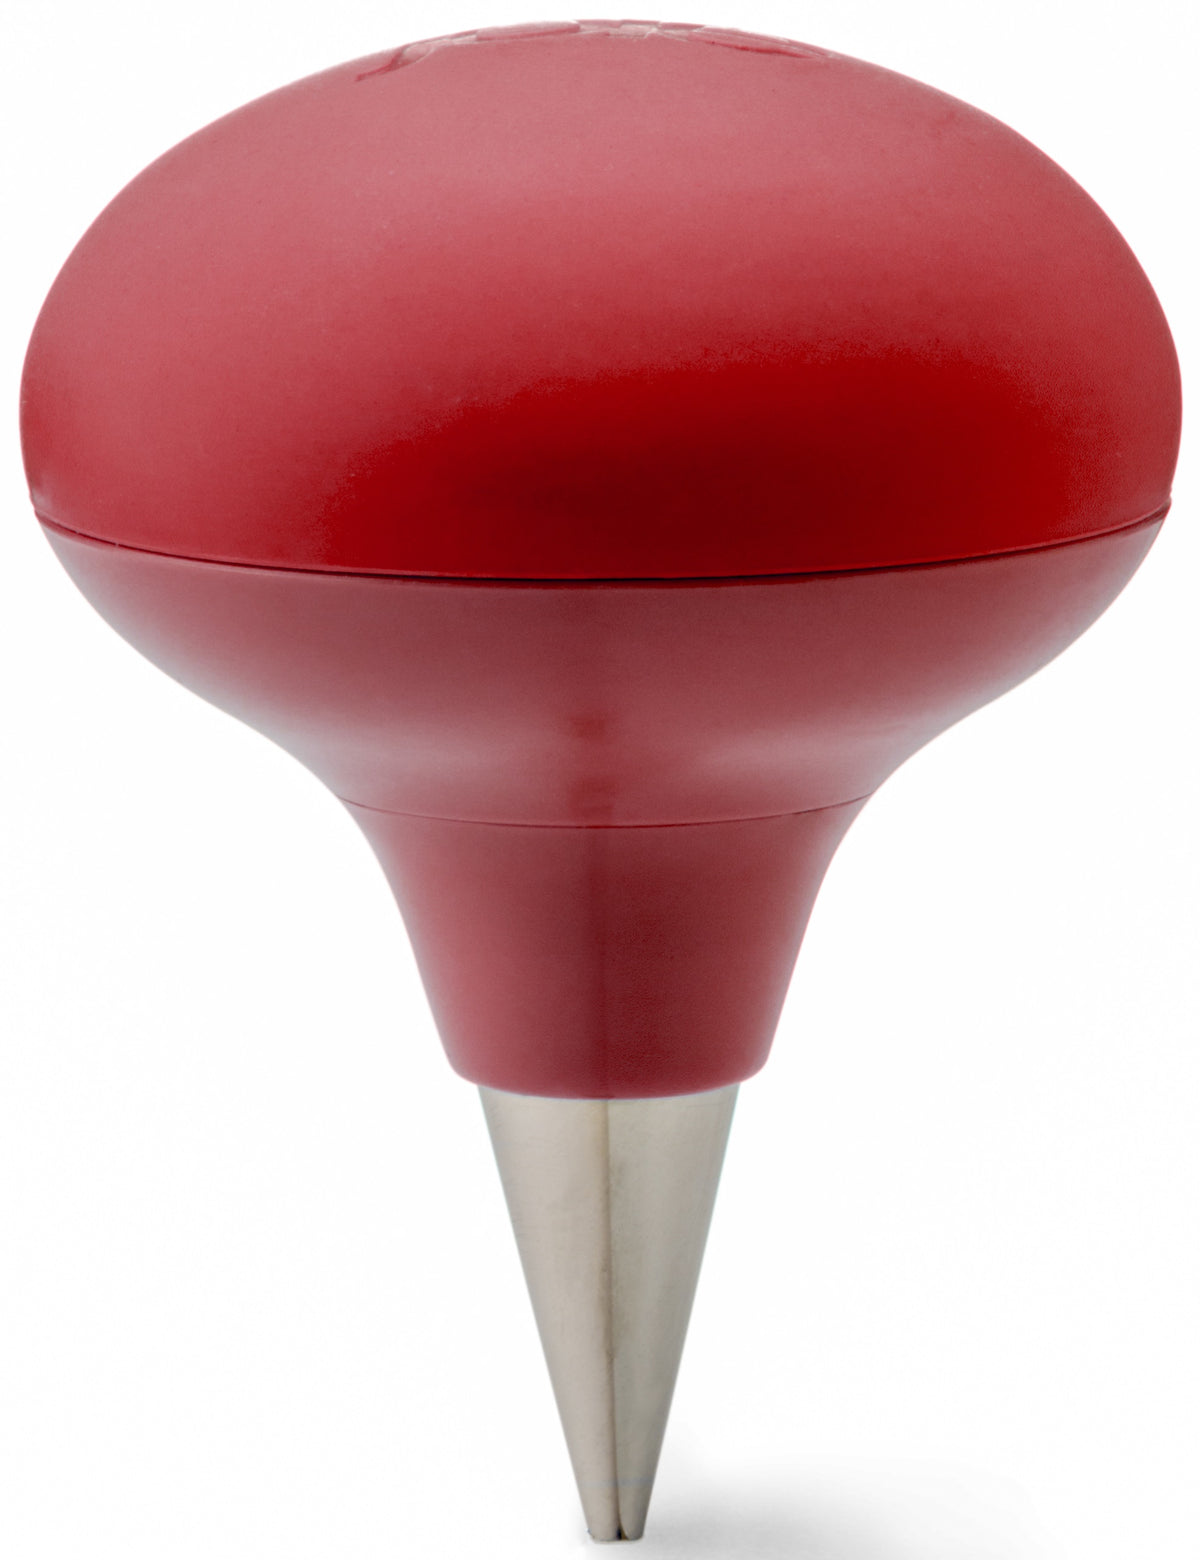 Joie MSC 17222 Icing Ball, Red